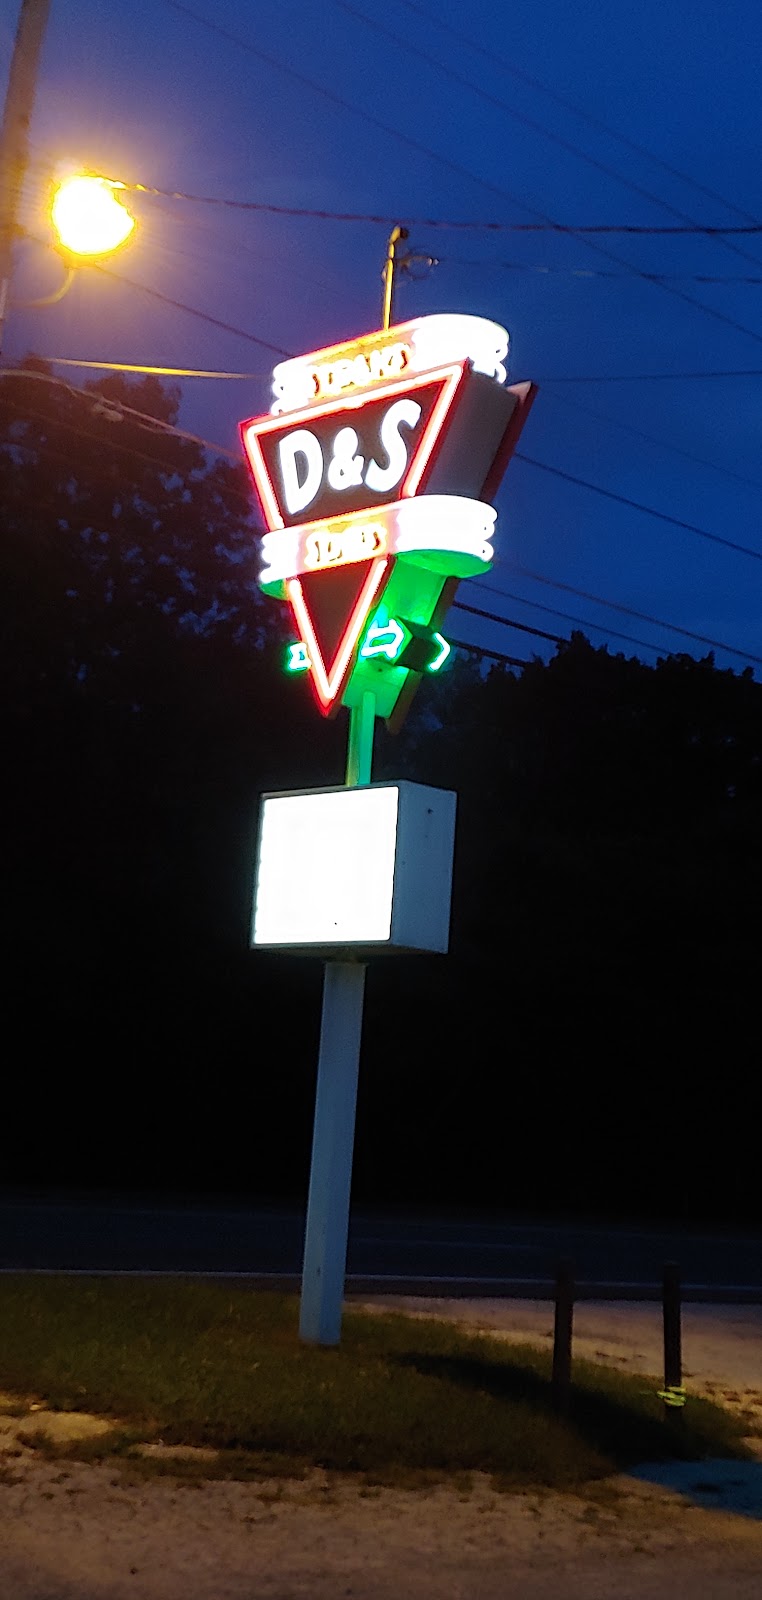 D & S Sub Shop | 305 S White Horse Pike, Waterford Works, NJ 08089 | Phone: (856) 768-1867